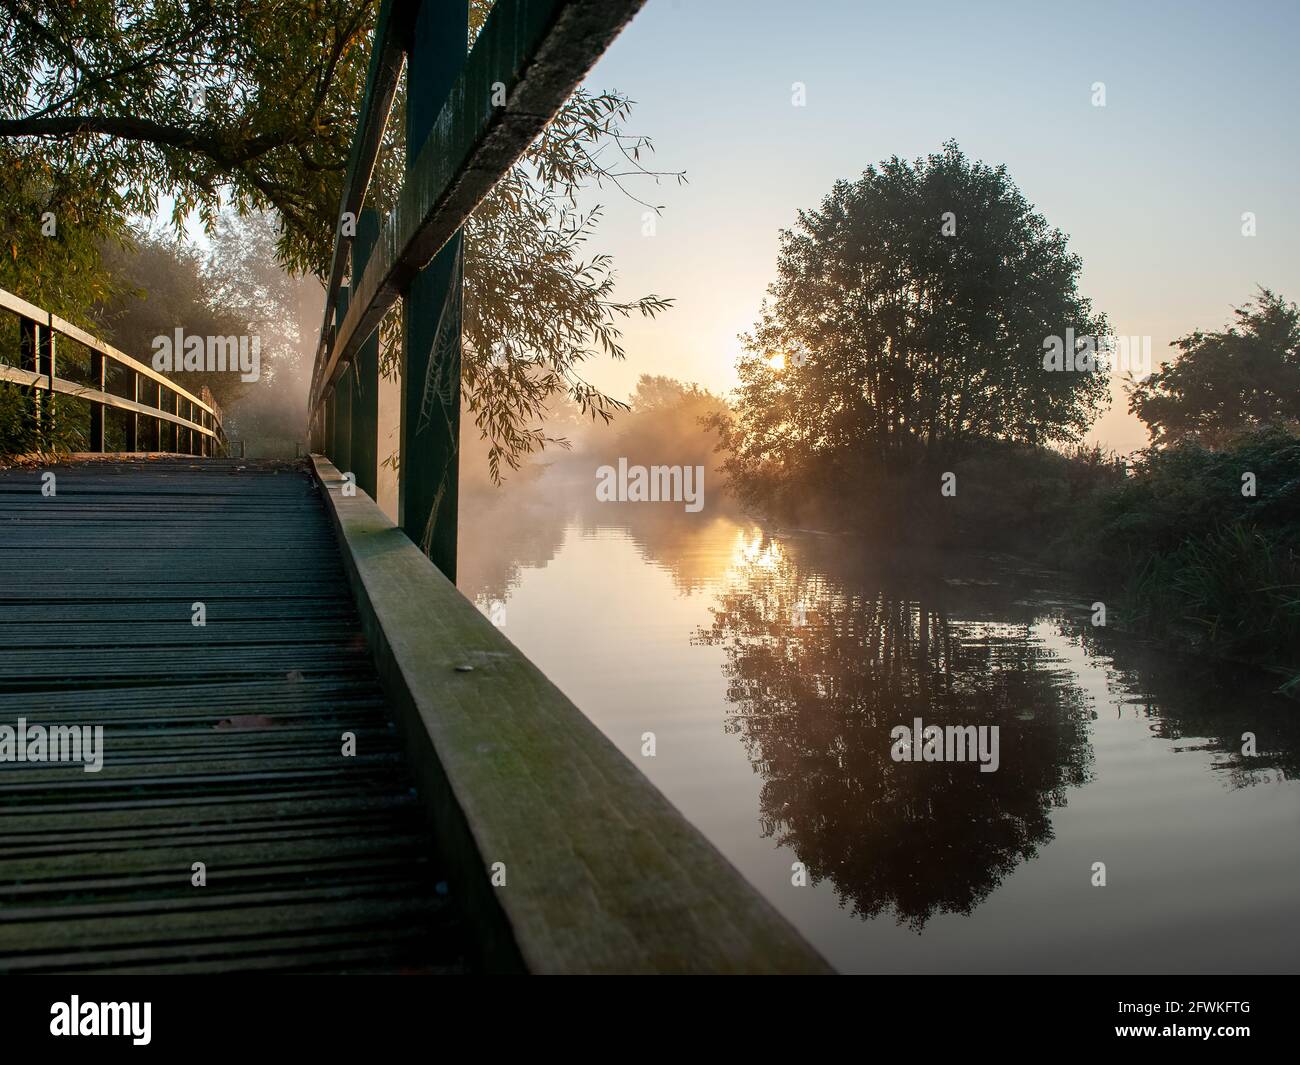 Wooden footbridge over river at sunrise with layer of mist and trees reflected in water beneath a clear sky with still waters Stock Photo